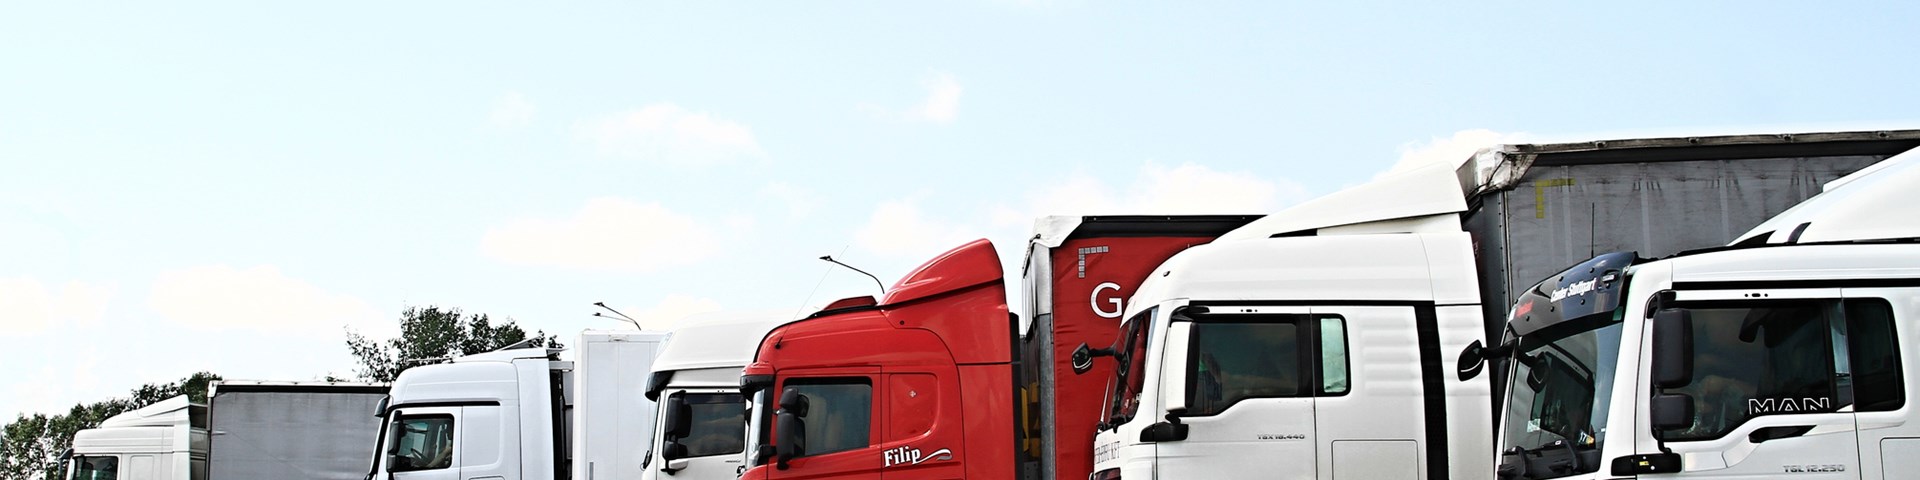 Several lorries lined up next to each other 